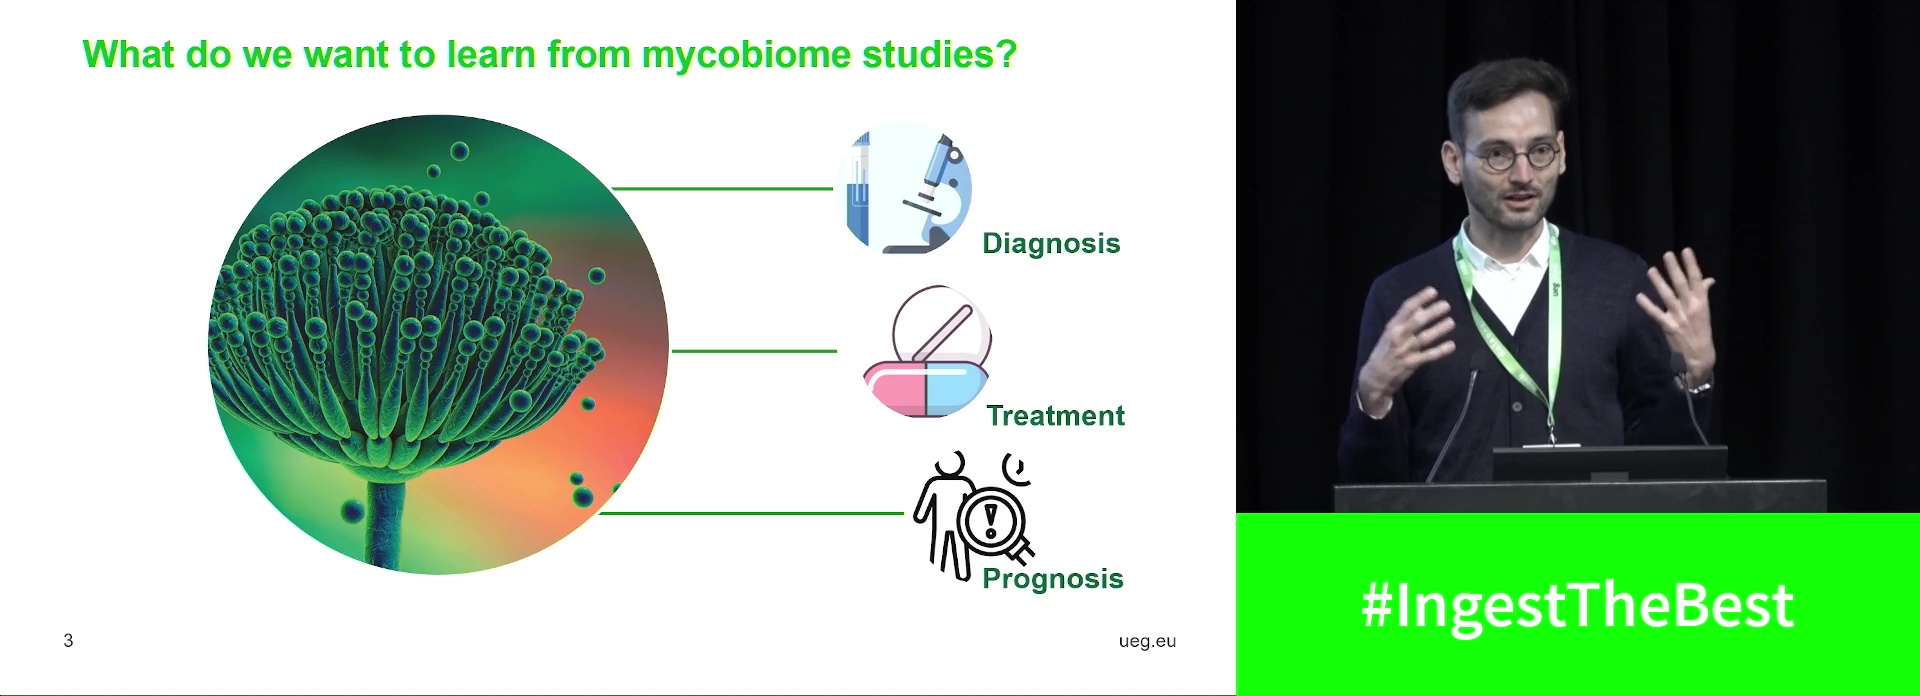 Fungi in IBD: What can we learn from mycobiome studies?